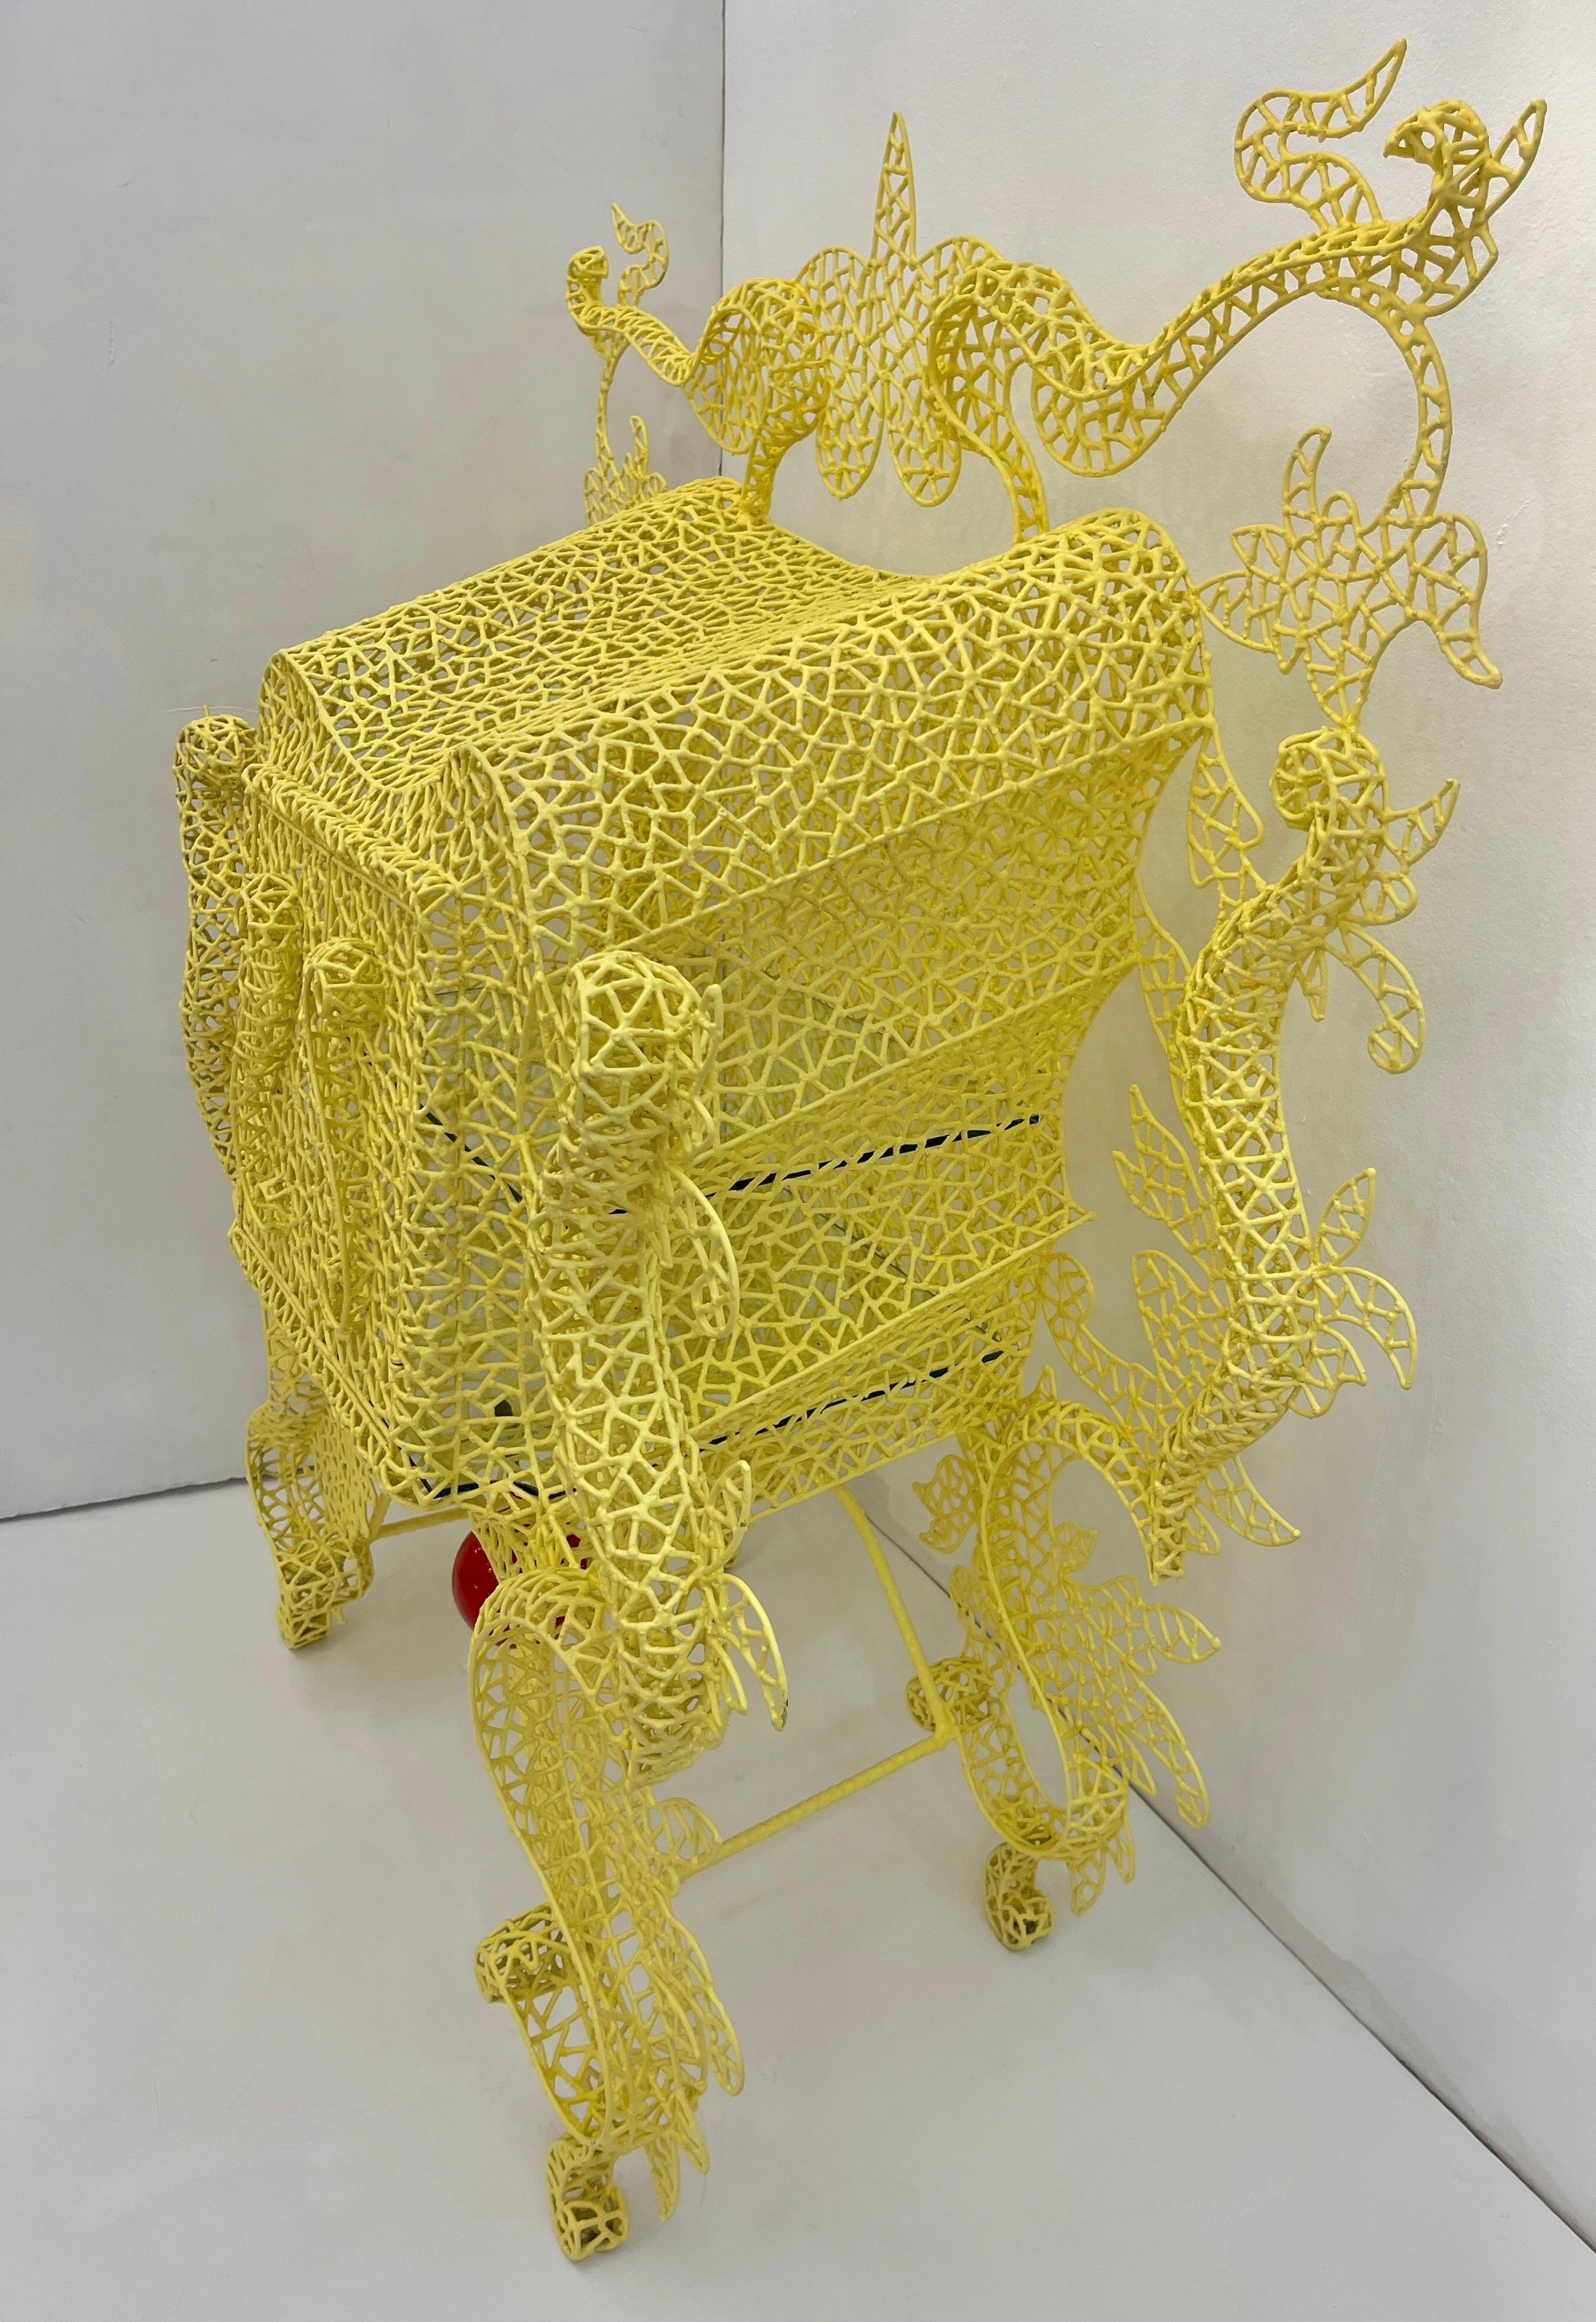 Spazzapan Italian Post-Modern Pop Art Yellow Baroque Metal Sculpture Cabinet In Good Condition For Sale In New York, NY